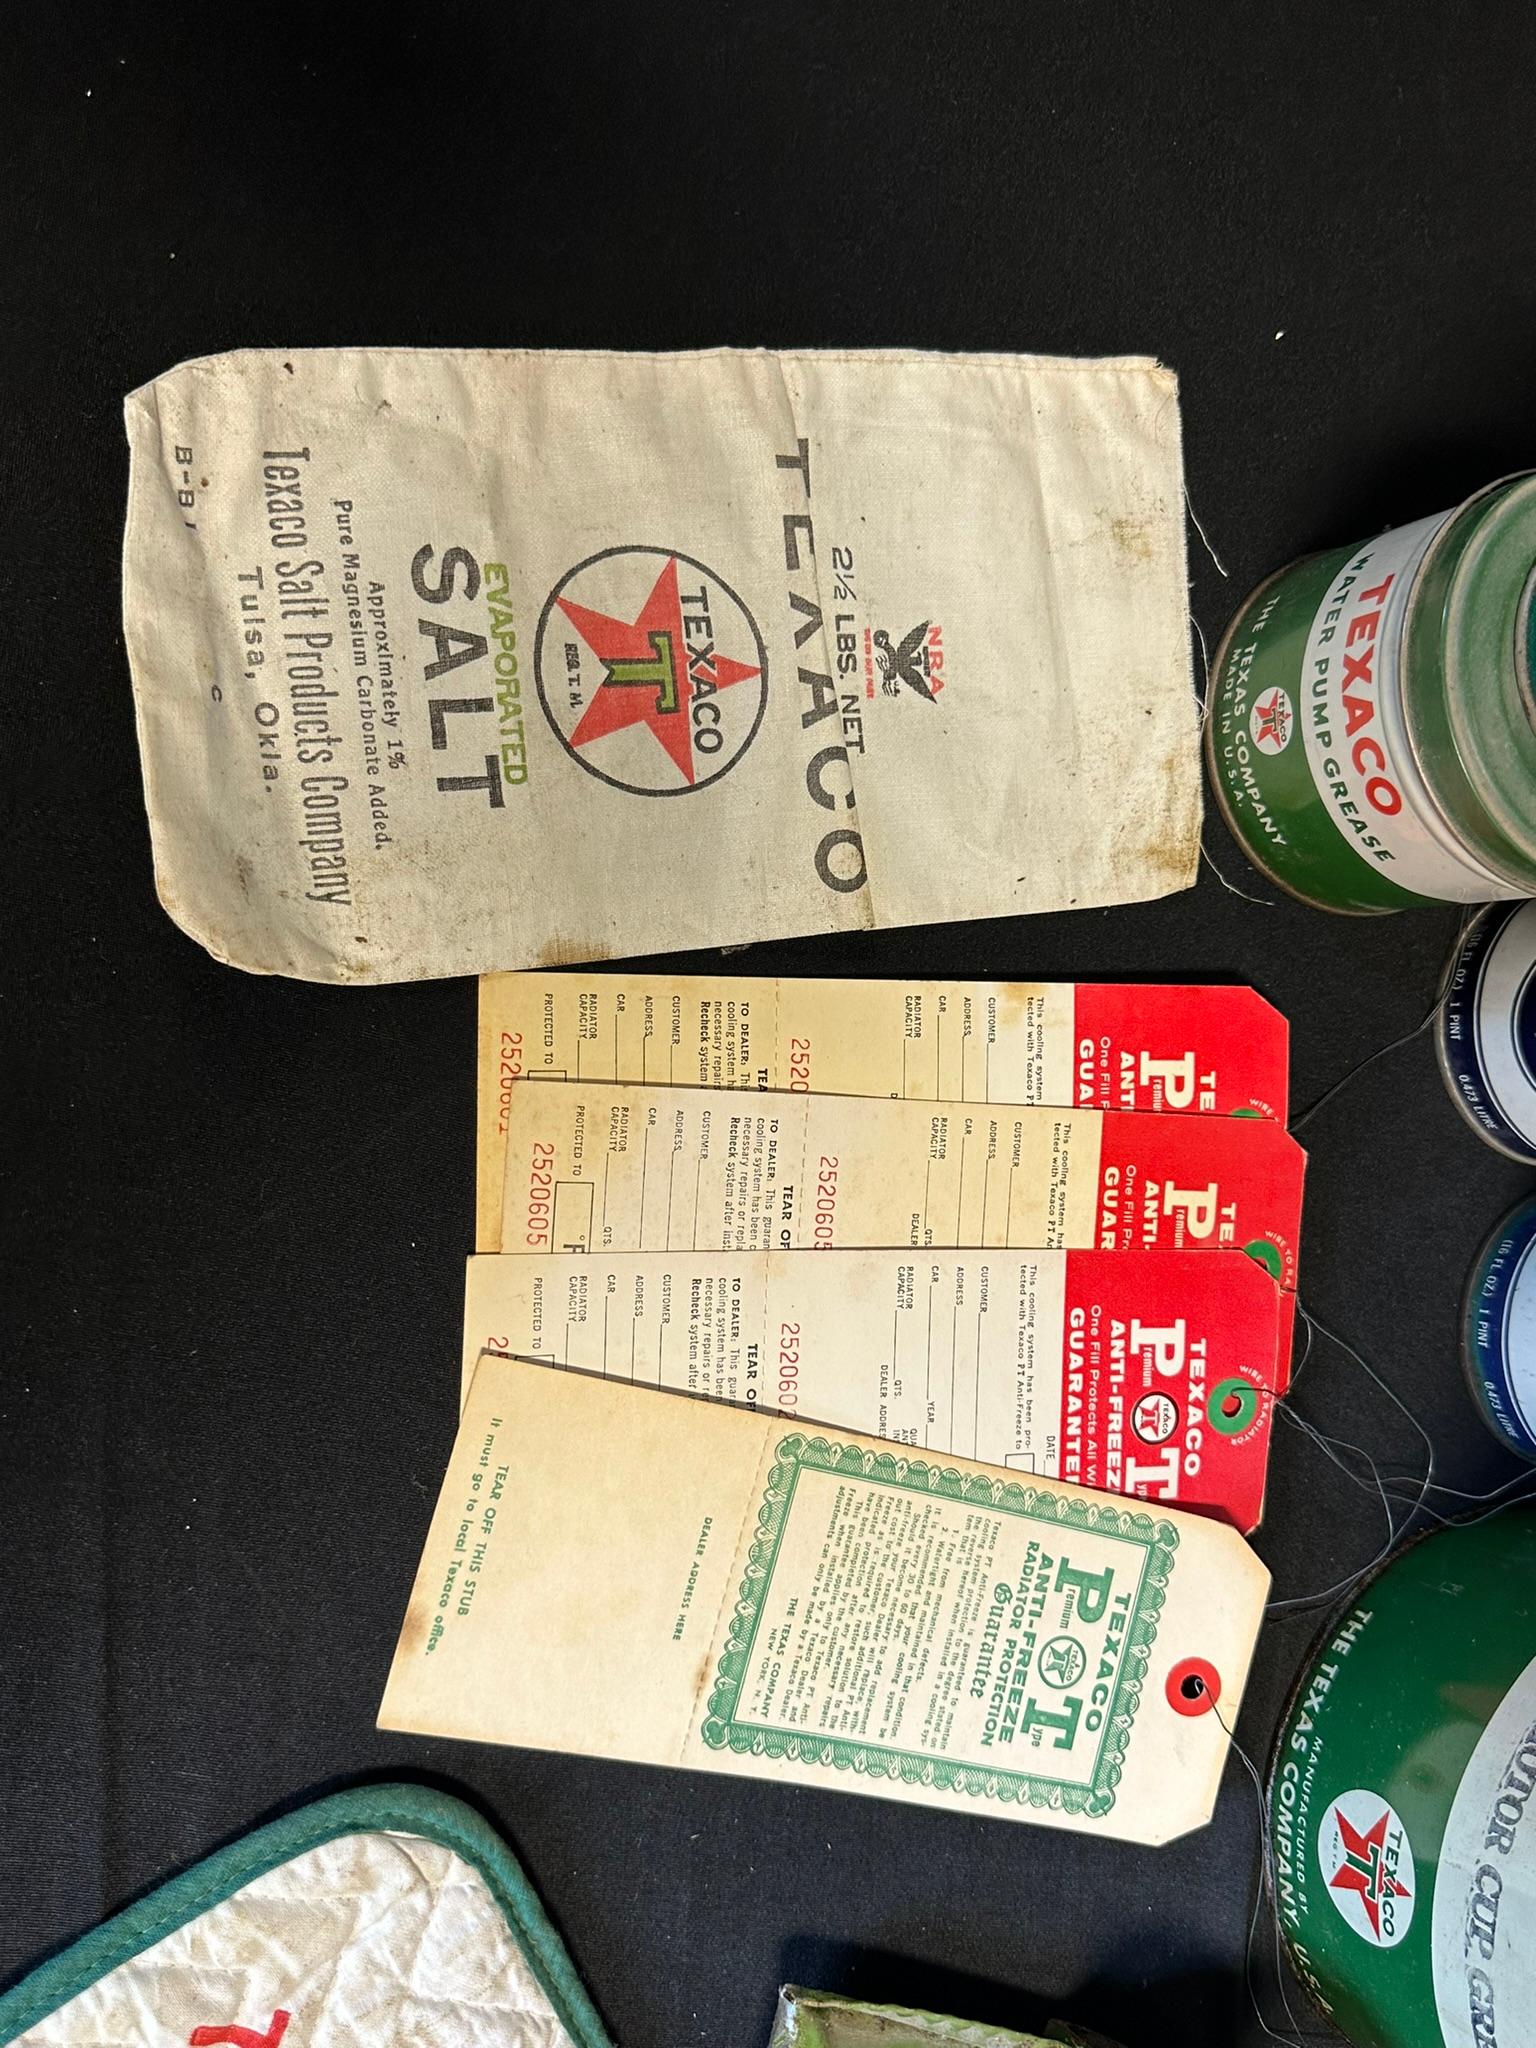 Lot 20 Texaco Early 1920s-60s Gas Station Motor Oil Cans, Greases, Pot Holder, Hang Tags & Salt Bag